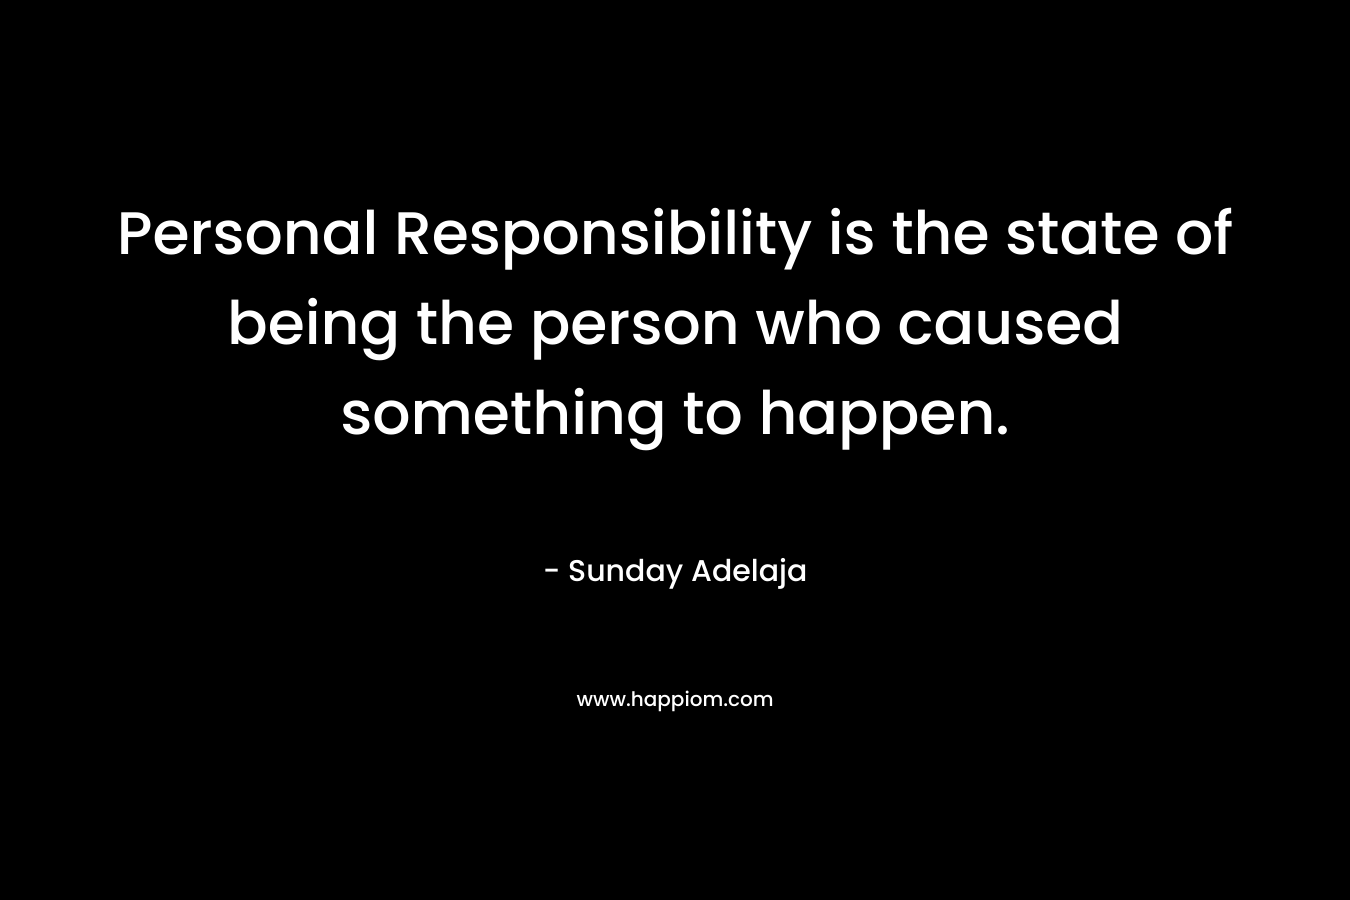 Personal Responsibility is the state of being the person who caused something to happen. – Sunday Adelaja